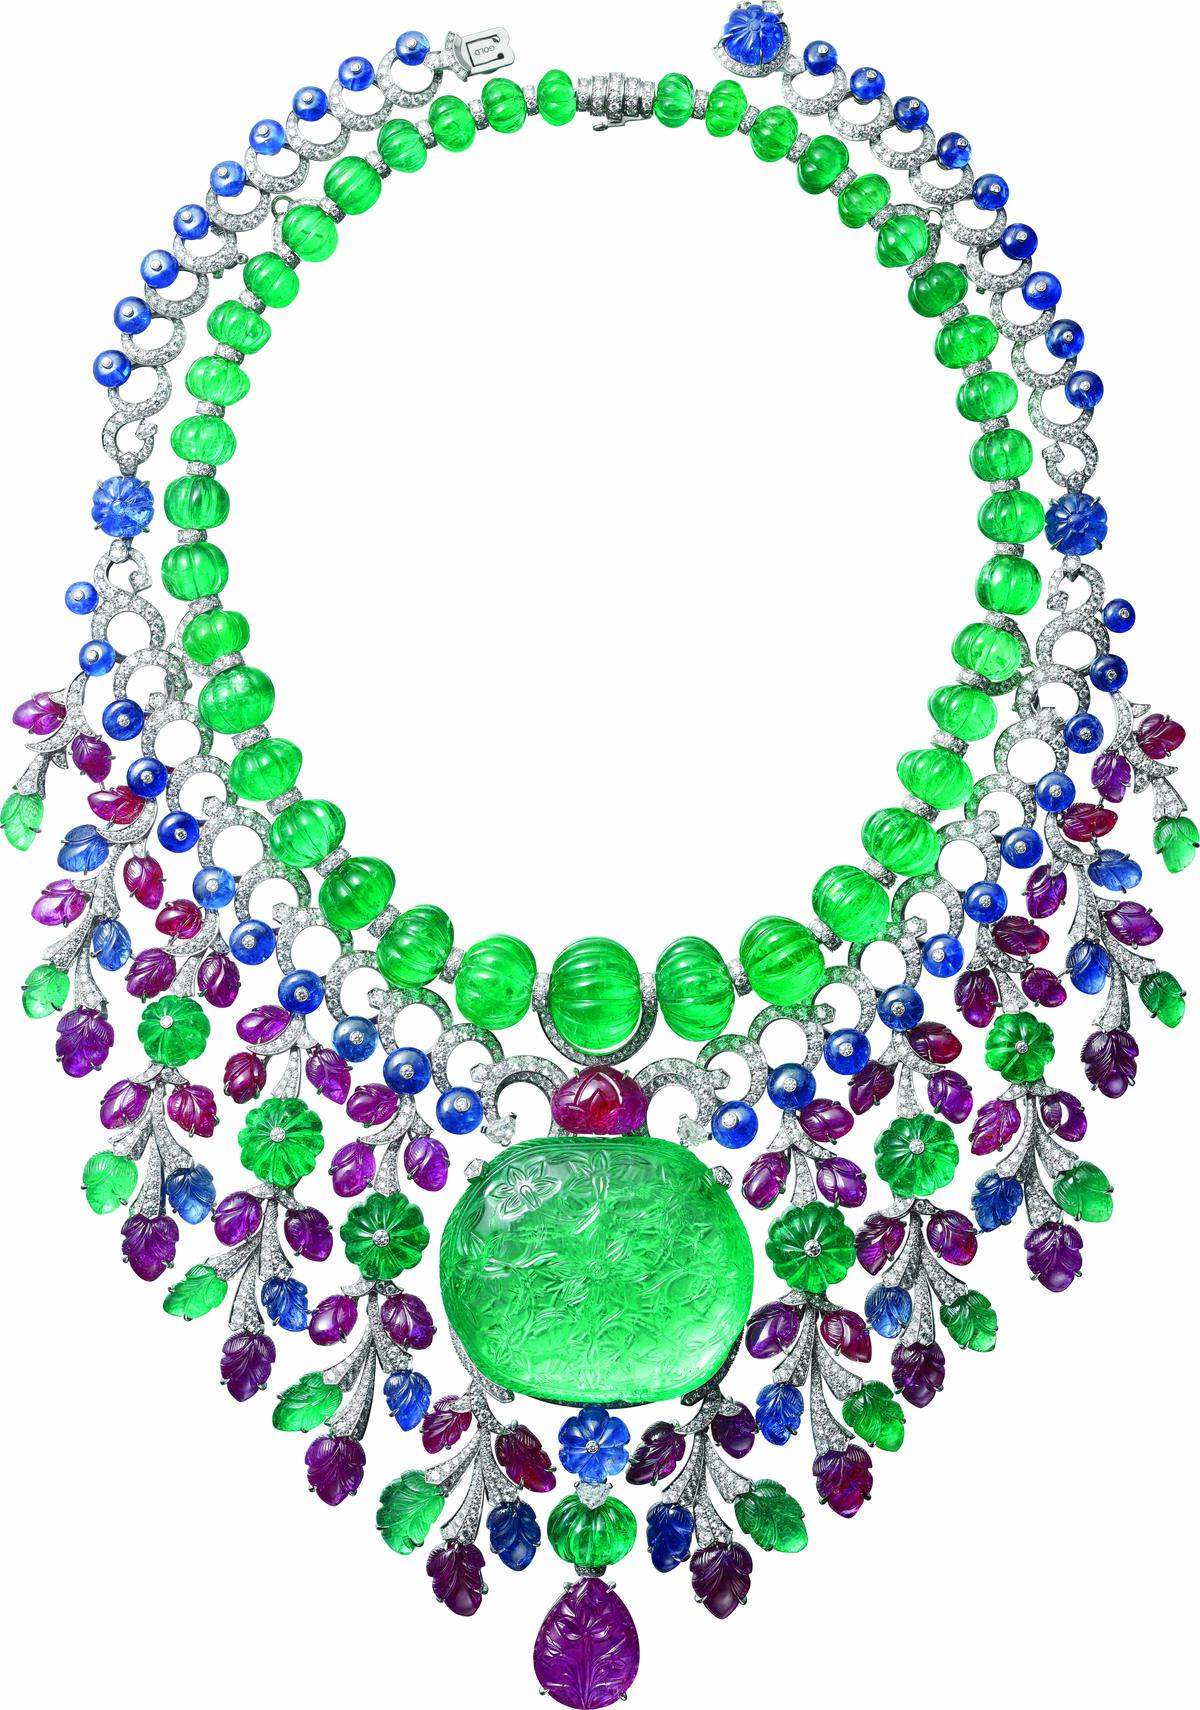 Rajasthan necklace (Cartier 2016) with a 136.99-carat carved cushion-shaped emerald from Colombia